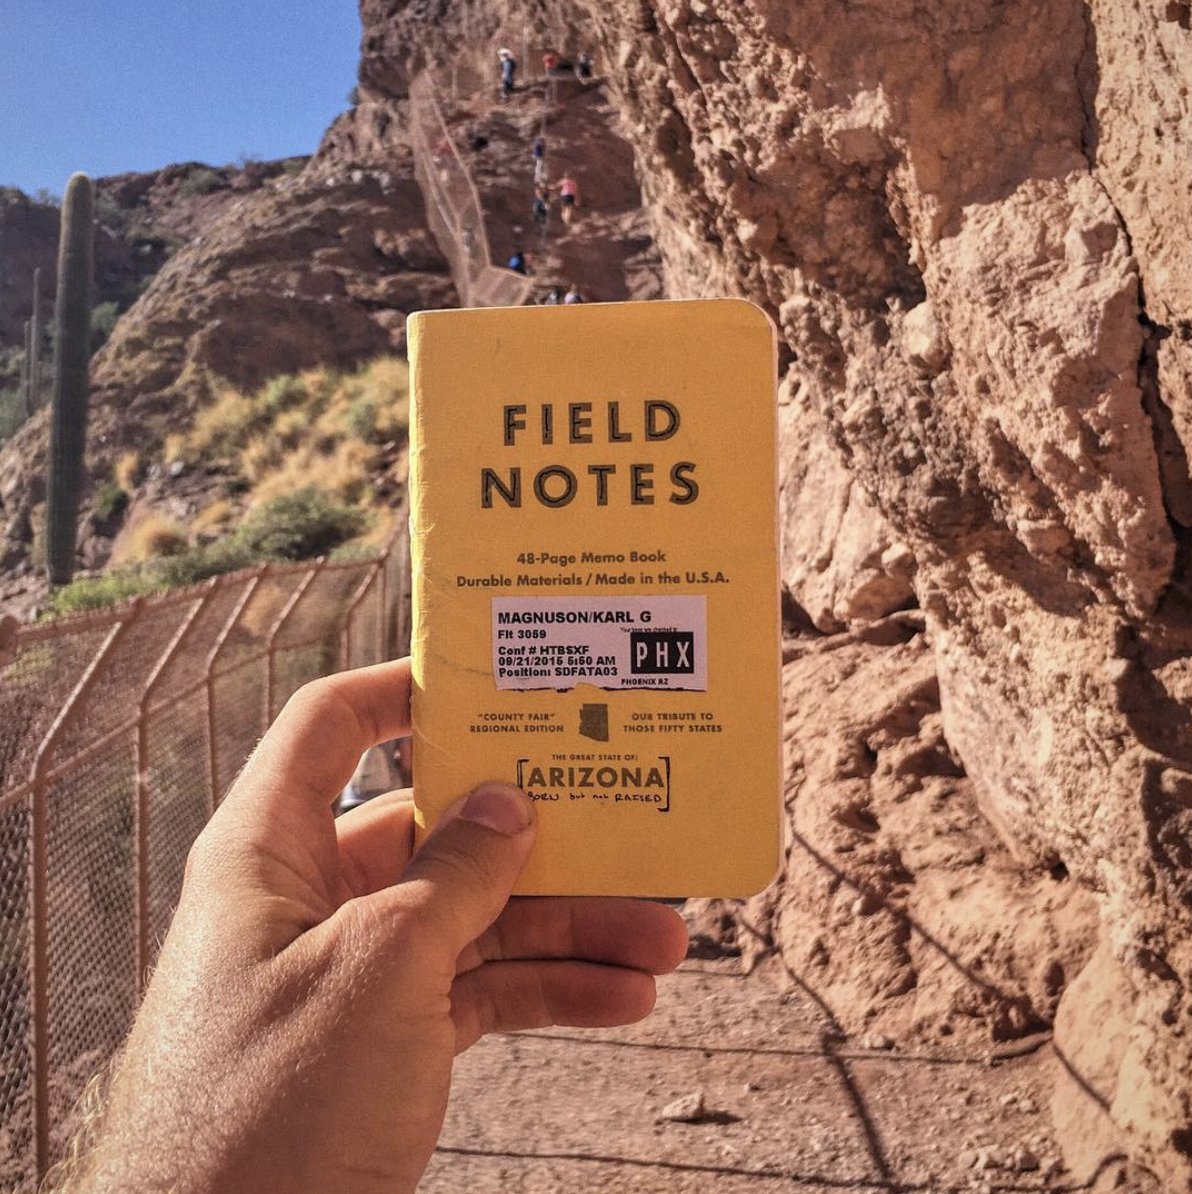 From CA to AZ (remember this was all from that one set of FN! A lot of ground to cover!) I typically take a picture of each CF  @FieldNotesBrand notebook in the state - here's AZ for an example.  https://www.instagram.com/p/BL467h9DWwz/ 